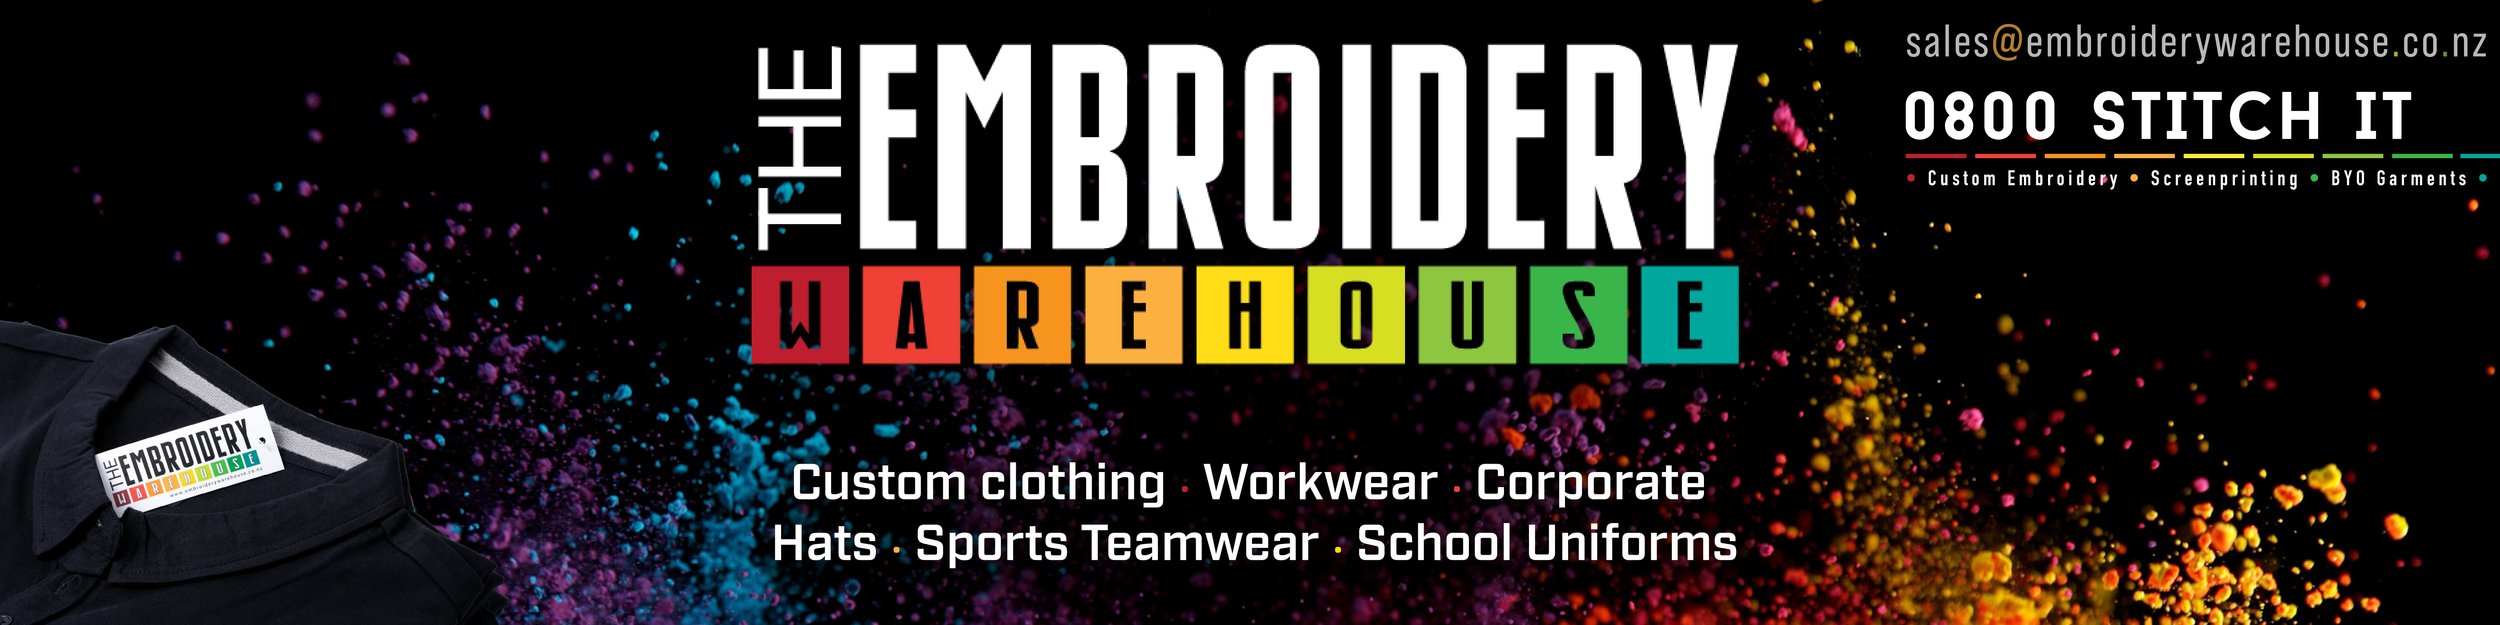 The Embroidery Warehouse banner@3x-100.jpg